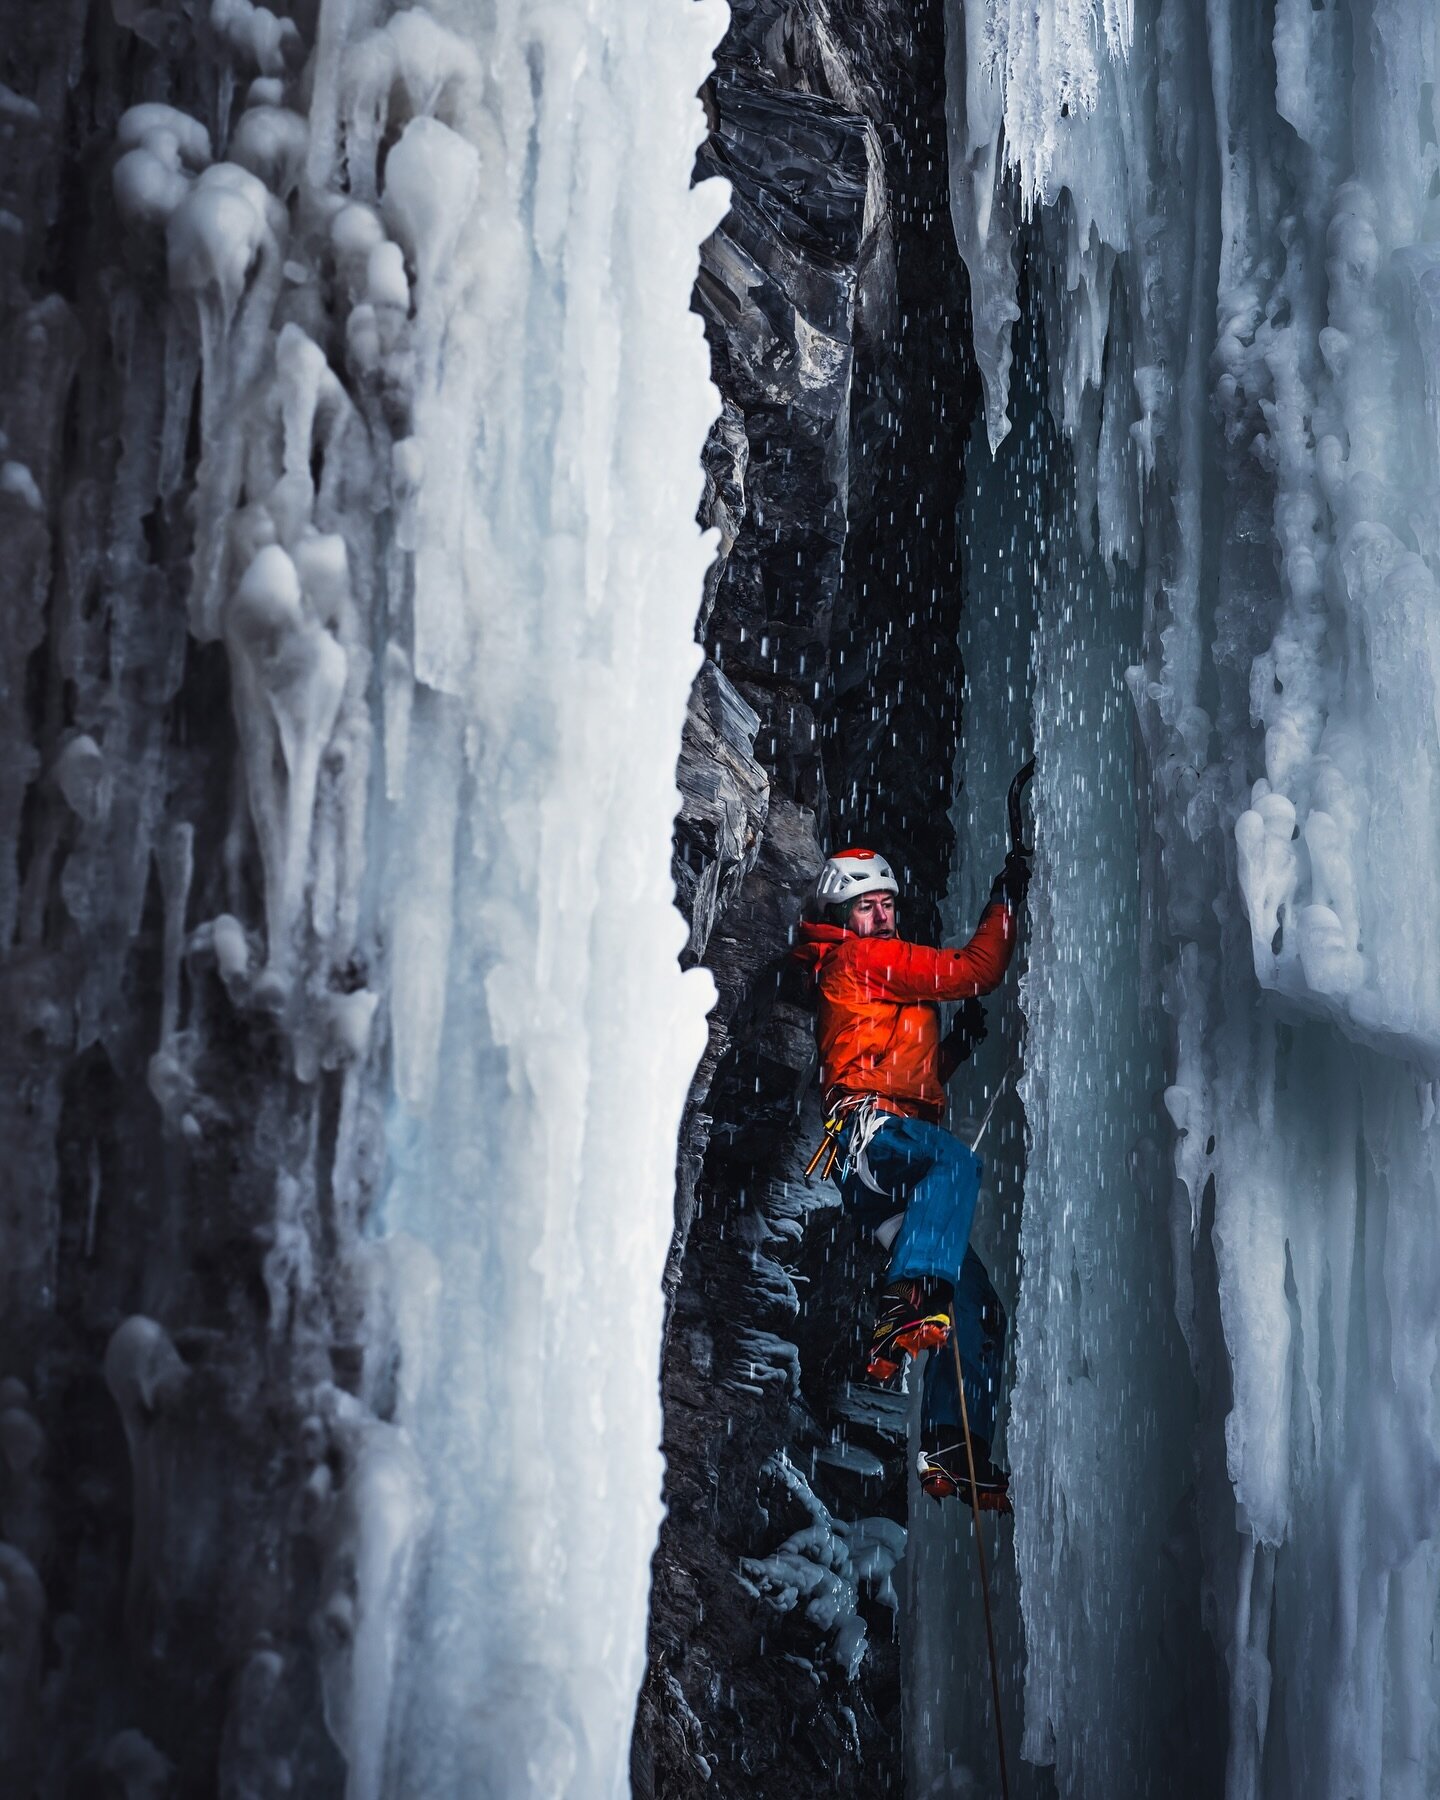 📍Pont Rouge, Qu&eacute;bec 
End of Festiglace 2024, Jonathan is climbing along ice climbing legend Jeff Mercier.
Jeff and Jonathan travelled together from France to attend the festival in Canada, and together they are exploring the world looking for